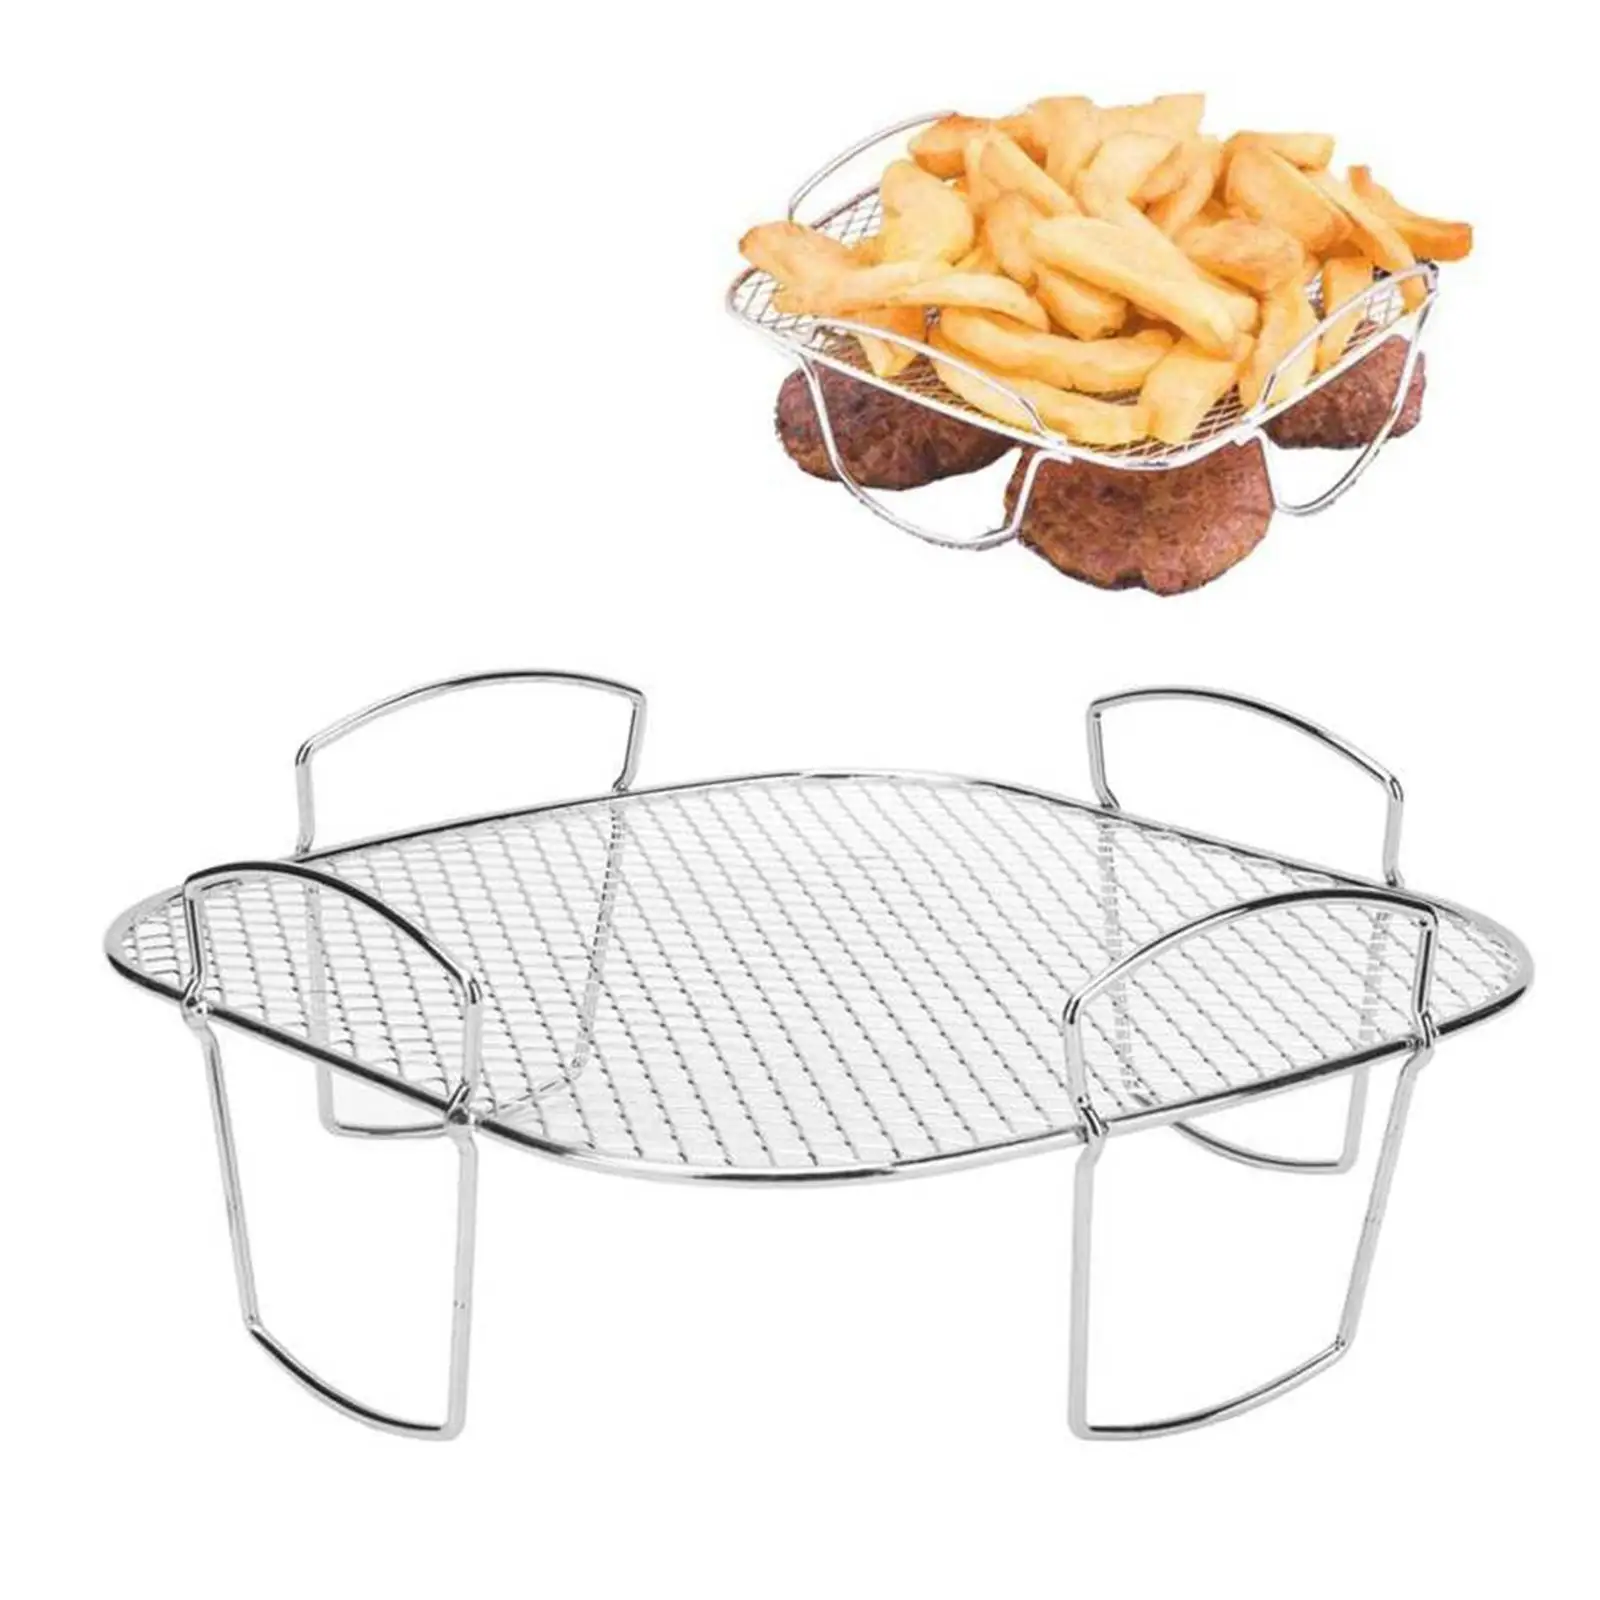 Cooking Rack French Fries Rack Baking Cooling Steaming Rack Grill Rack Fryer Parts